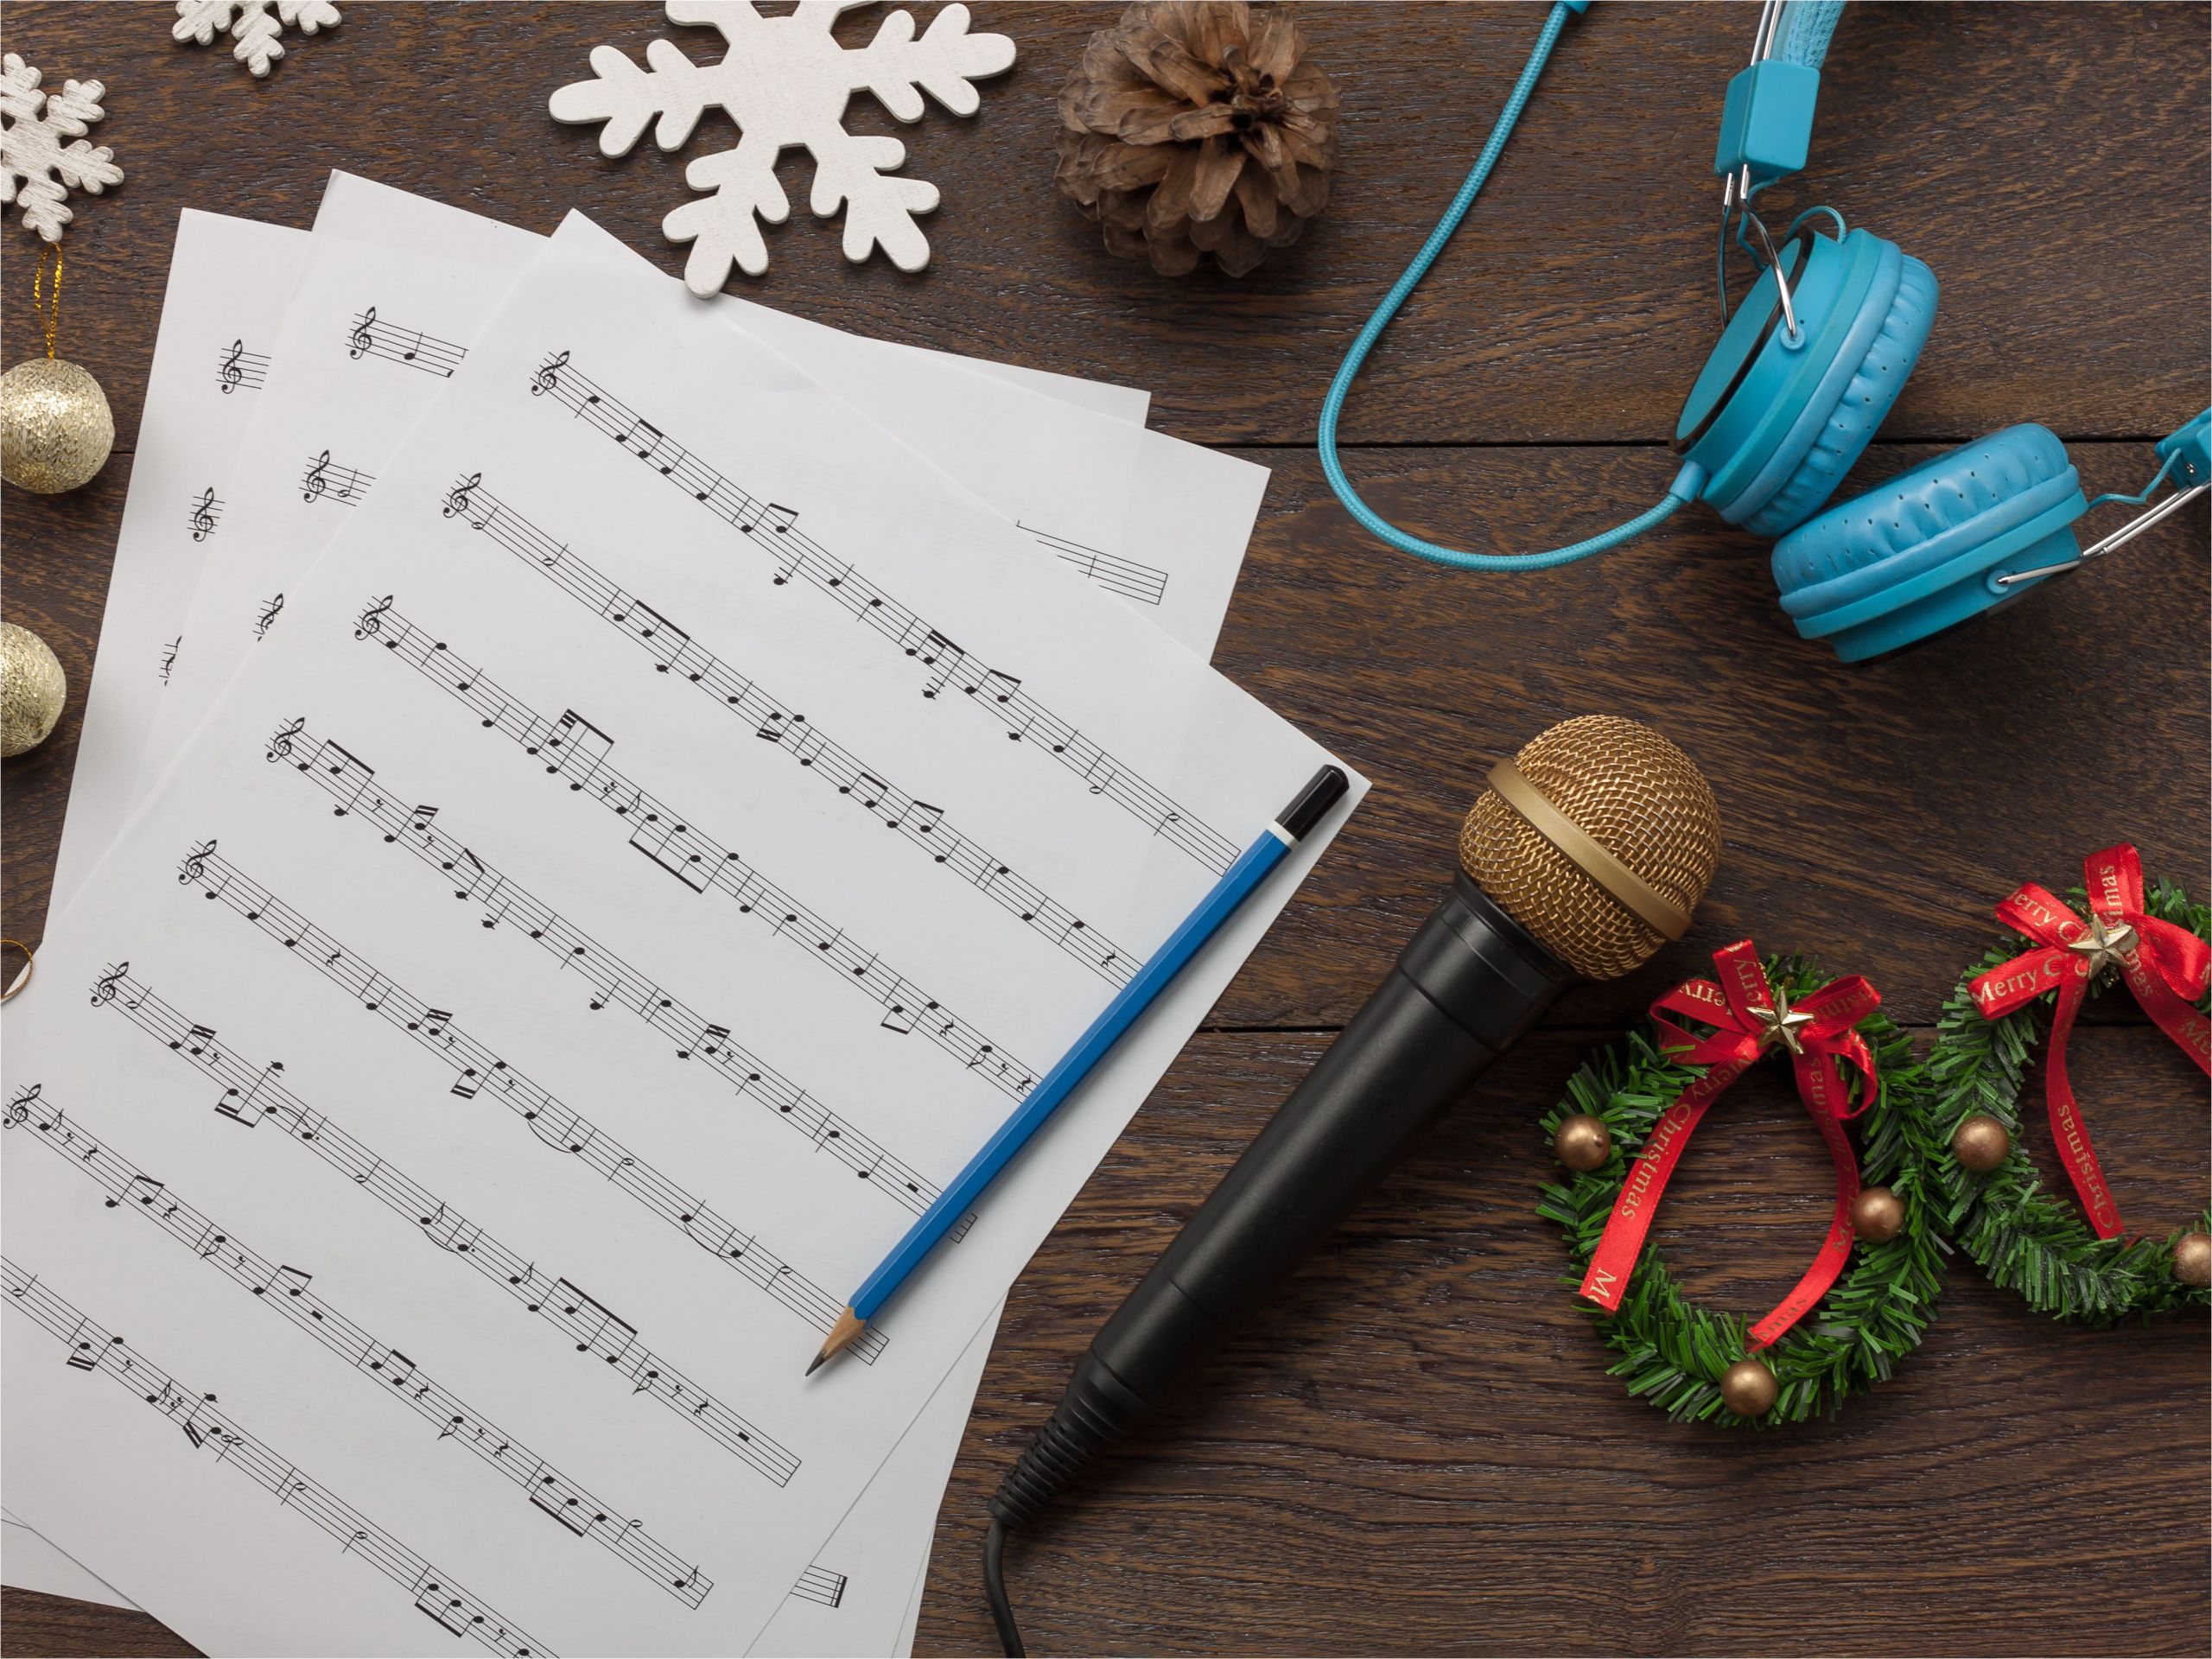 table top view of music sheet note and accessories merry christmas happy new year concept instrument musical with decoration festive on the modern rustic dark brown wooden at home office desk 865548576 0c8520ffa2904d06a2b2eb04edc379d2 jpg